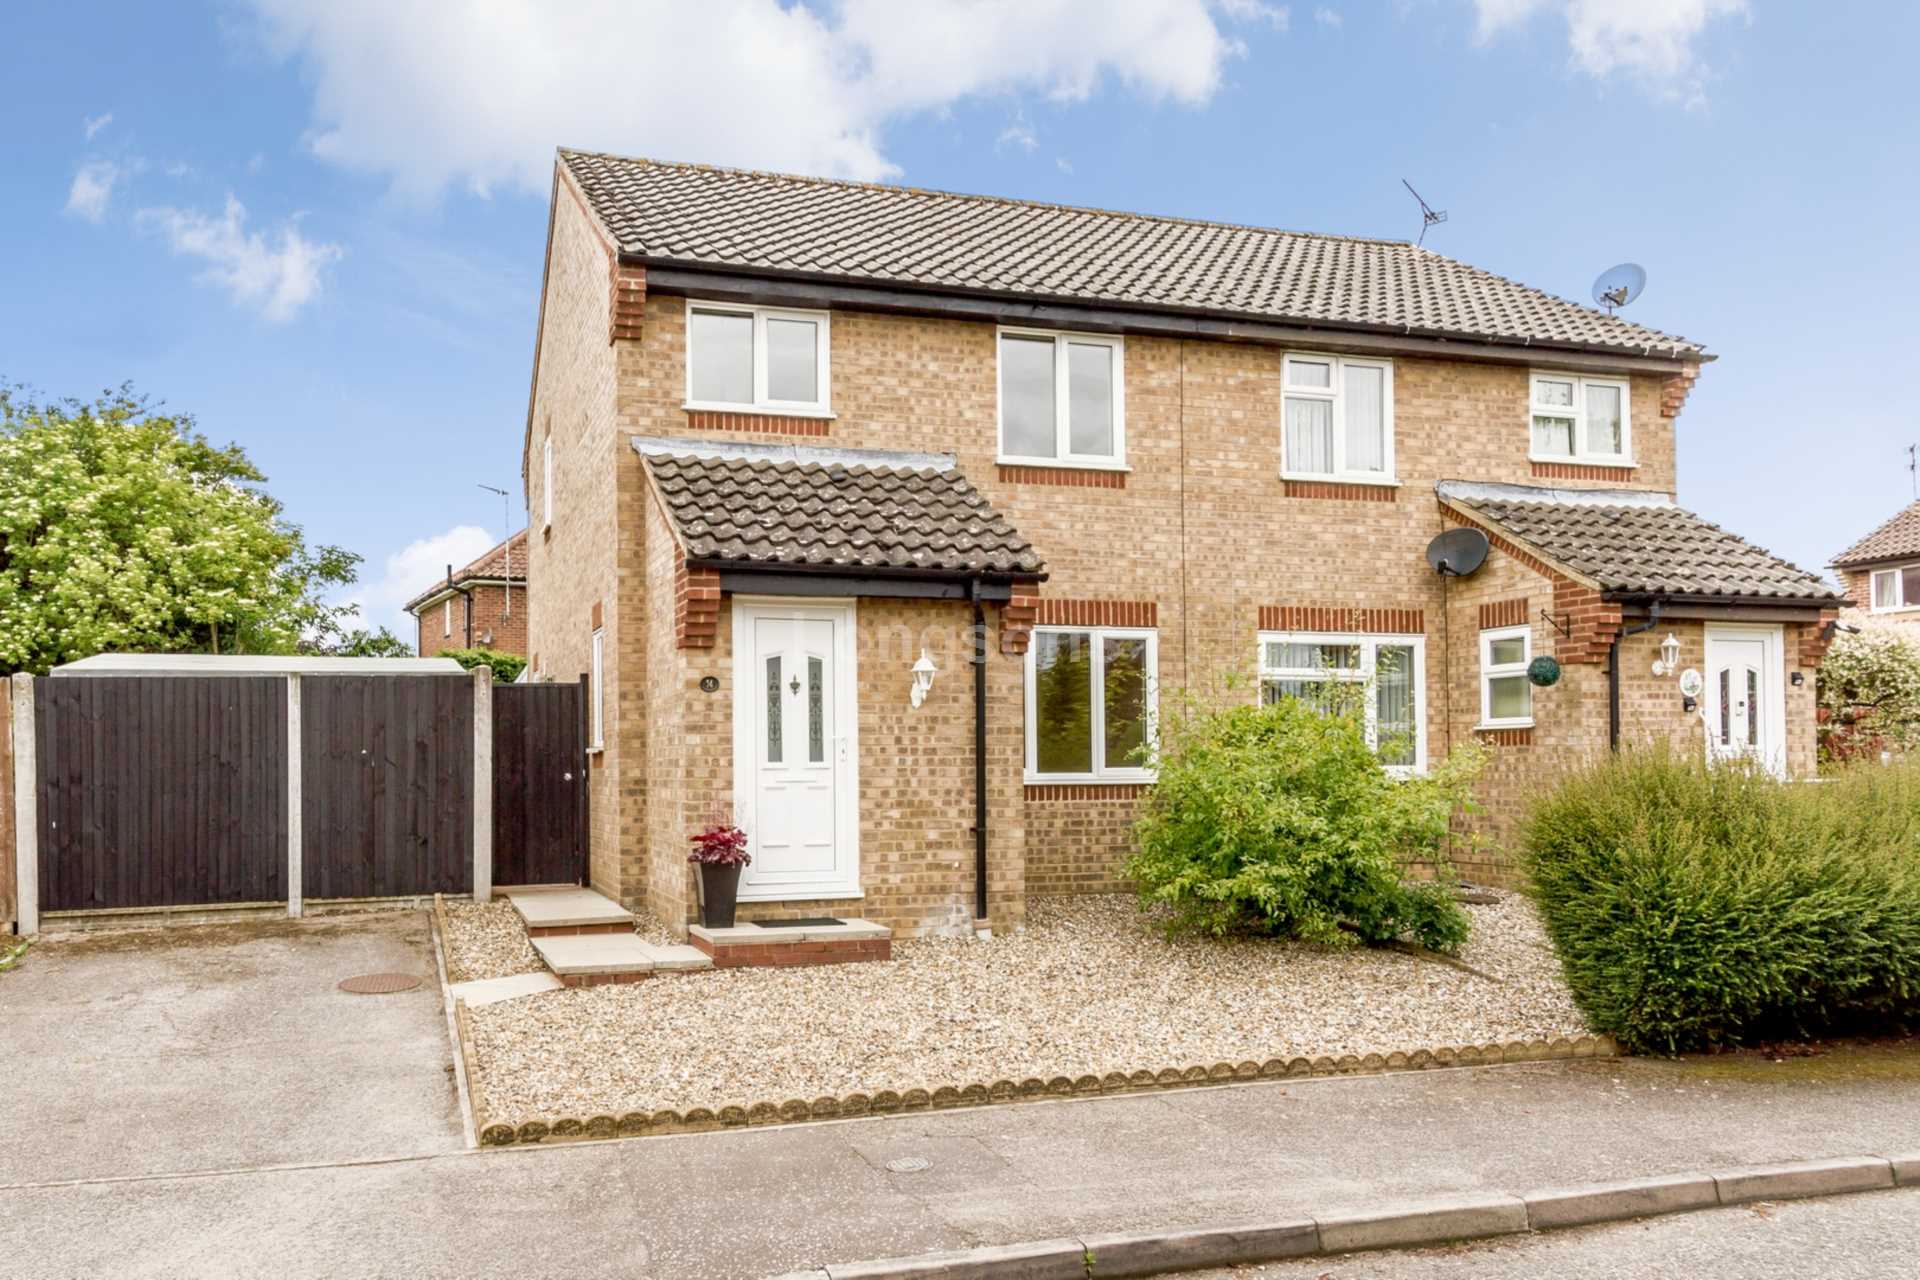 3 bed Semi-Detached House for rent in Swaffham. From Longsons - Swaffham